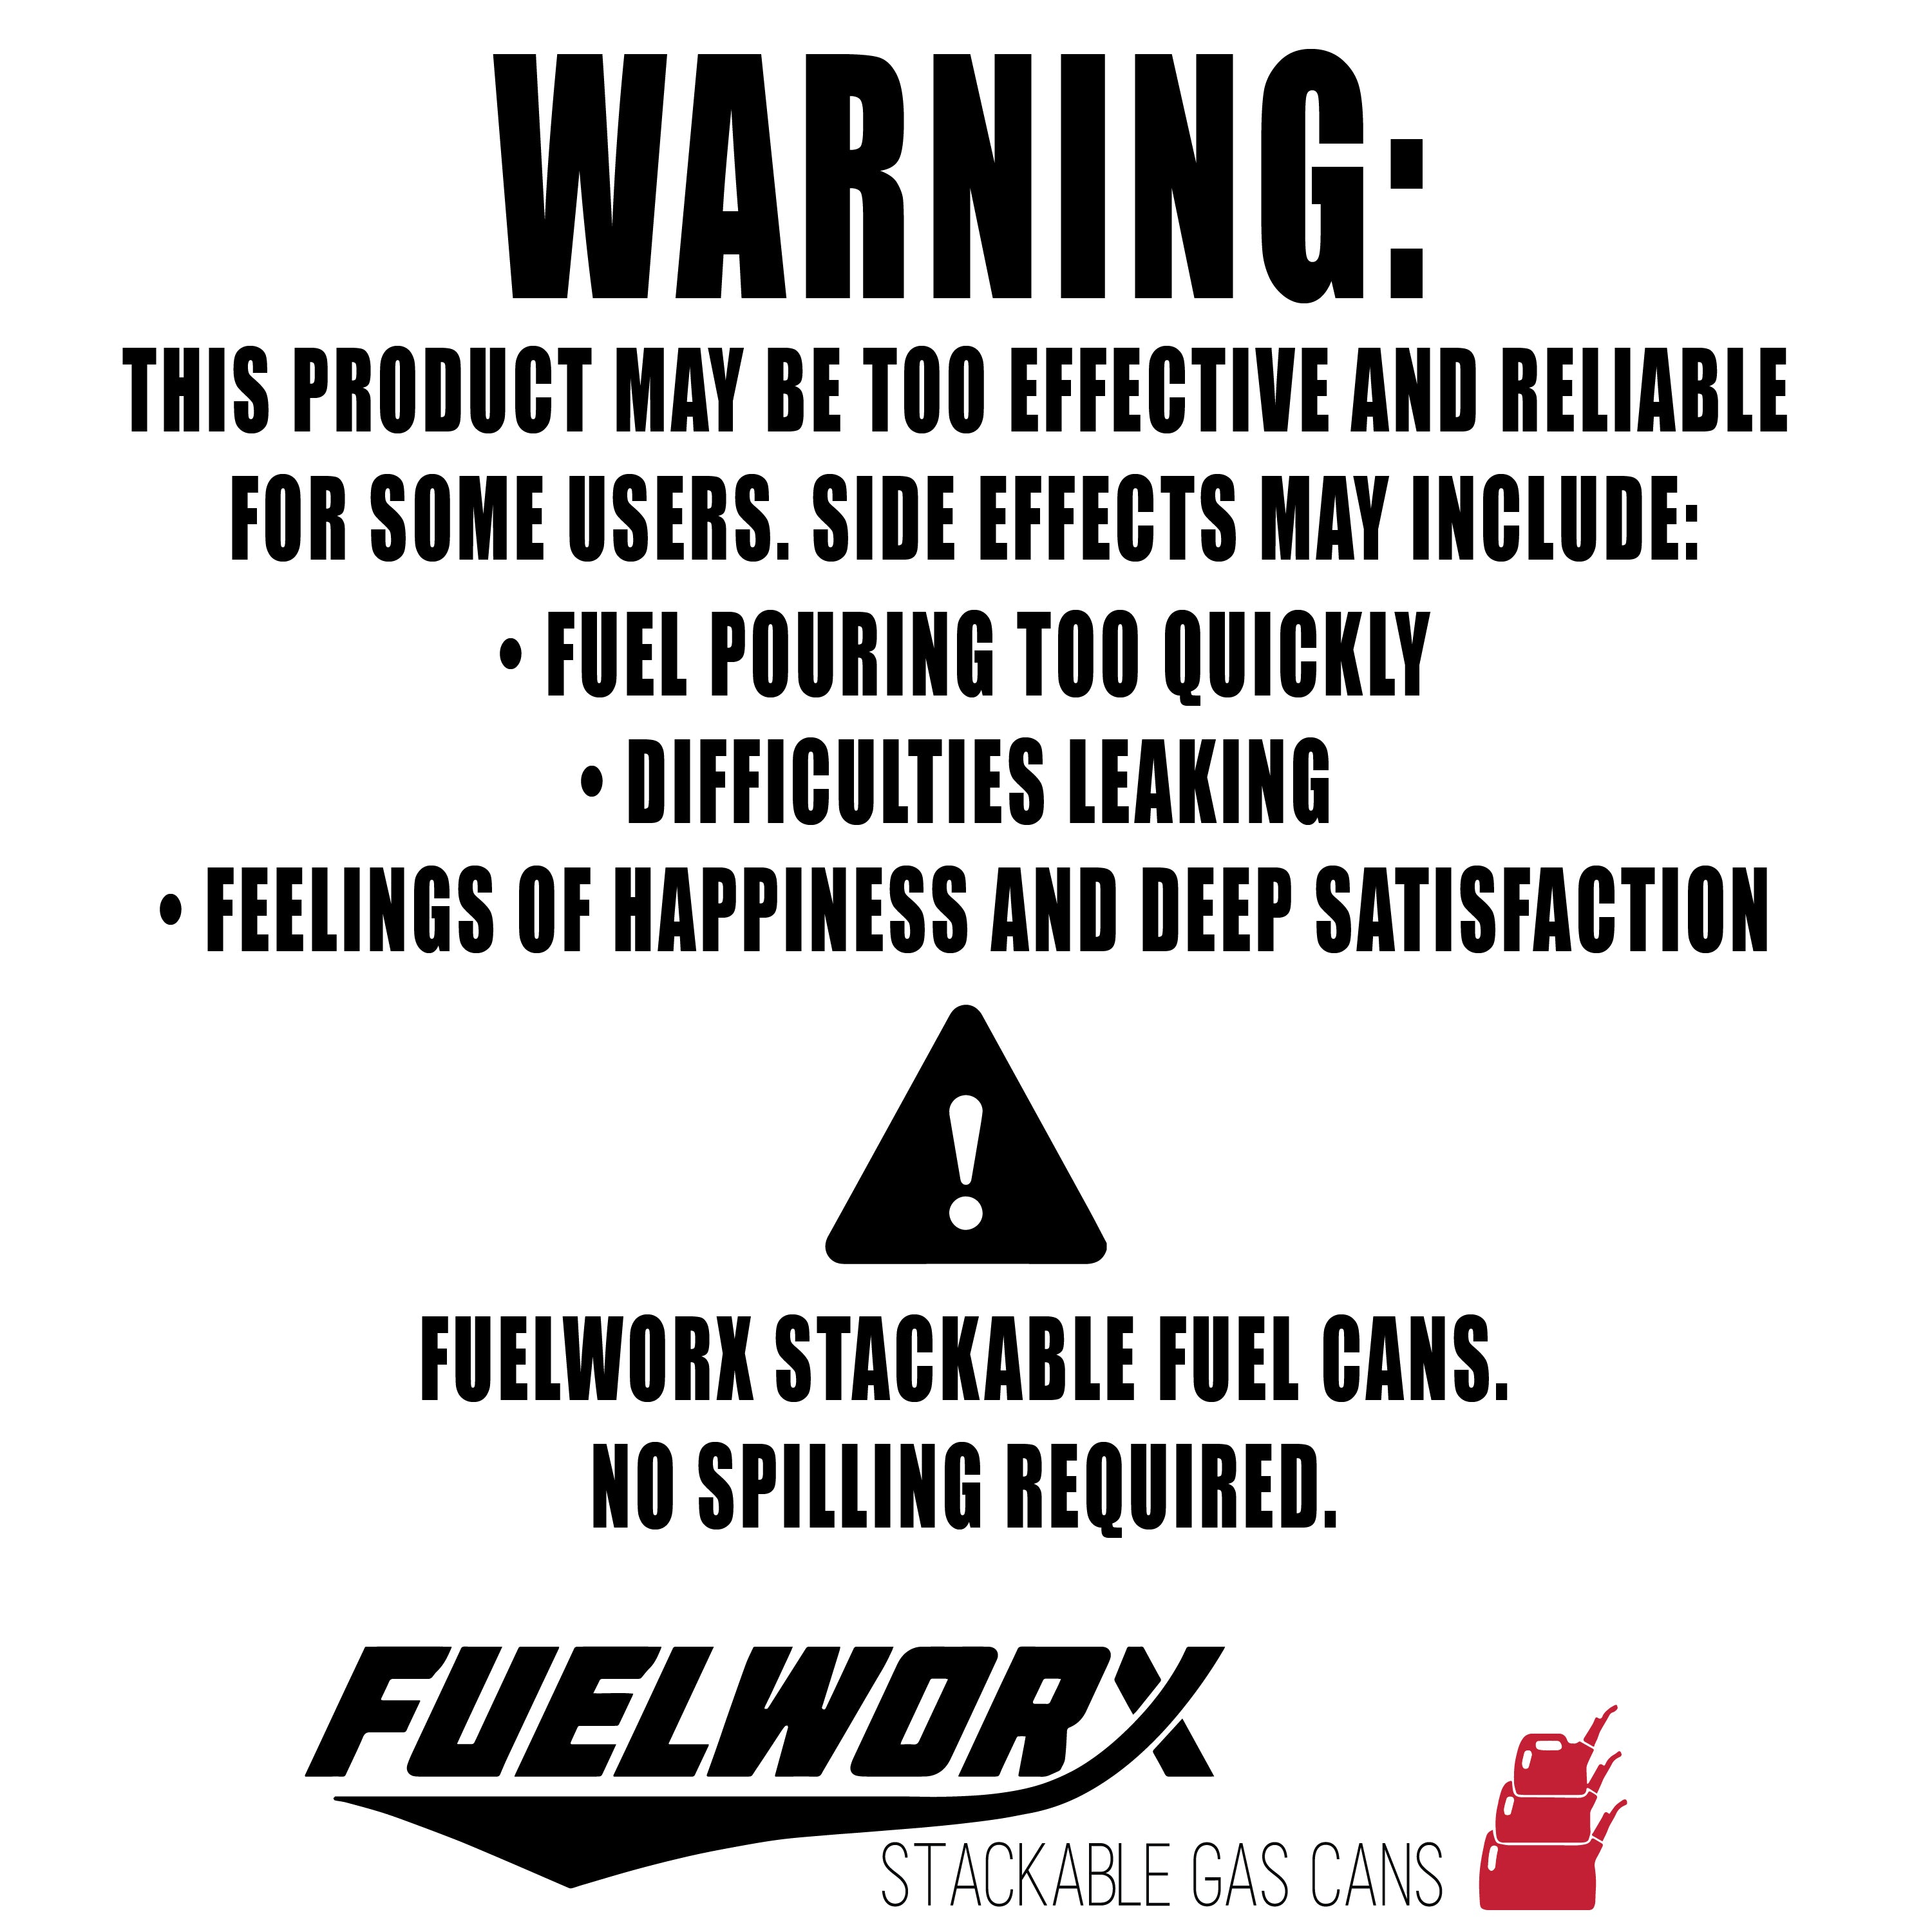 Fuelworx-Yellow-5-Gallon-Stackable-Fast-Pour-Diesel-Fuel-Cans-CARB-Compliant-Made-in-The-USA-5-Gallon-Diesel-Cans-2-Pack-image-7